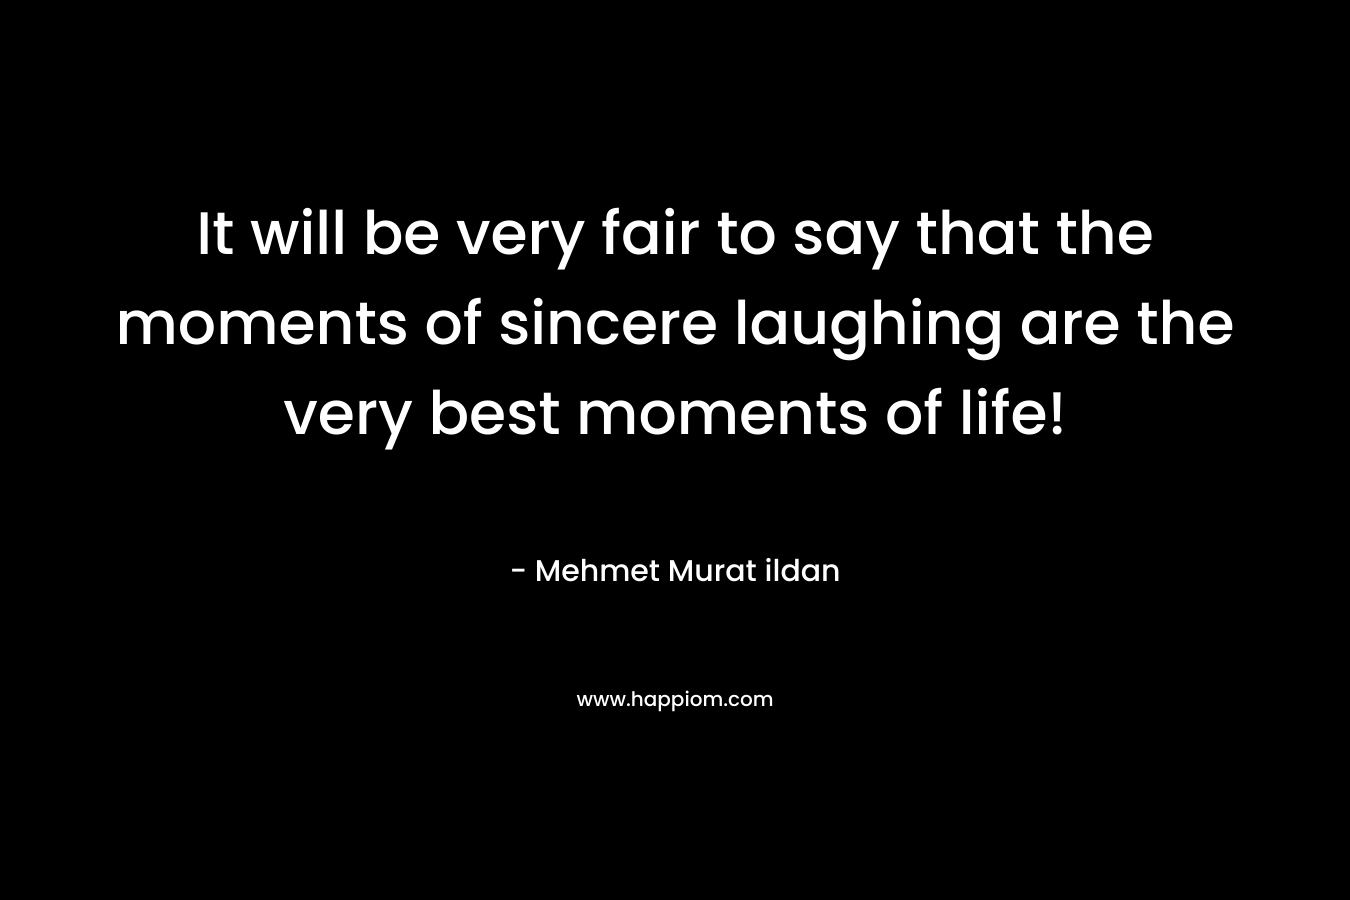 It will be very fair to say that the moments of sincere laughing are the very best moments of life! – Mehmet Murat ildan